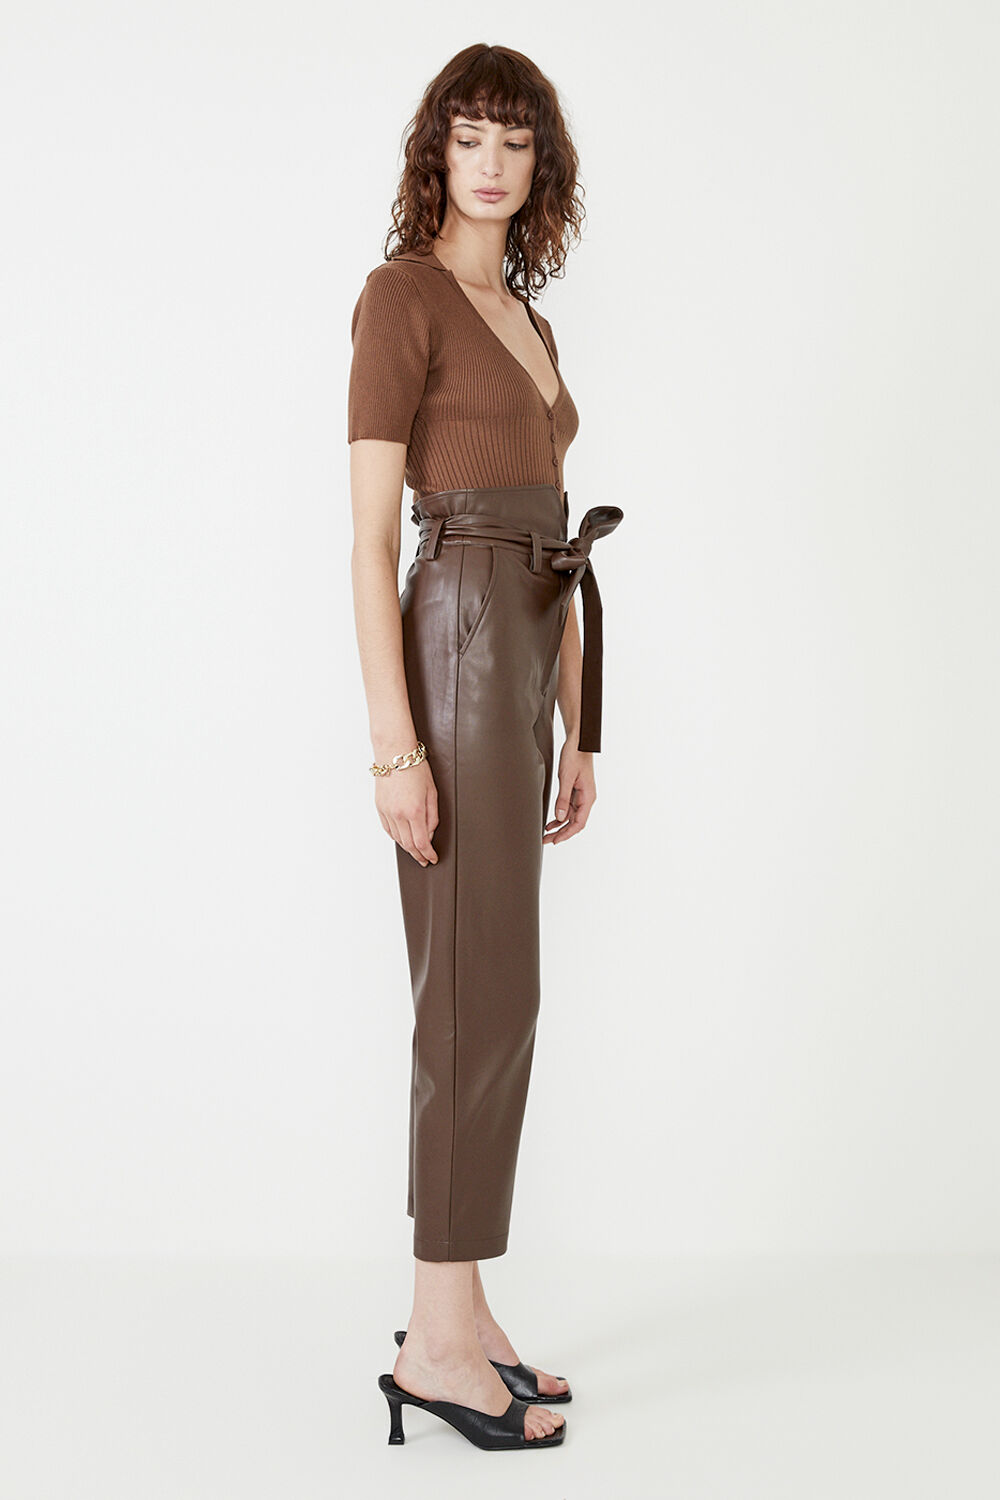 DEBBIE VEGAN LEATHER PANT in colour CHOCOLATE BROWN